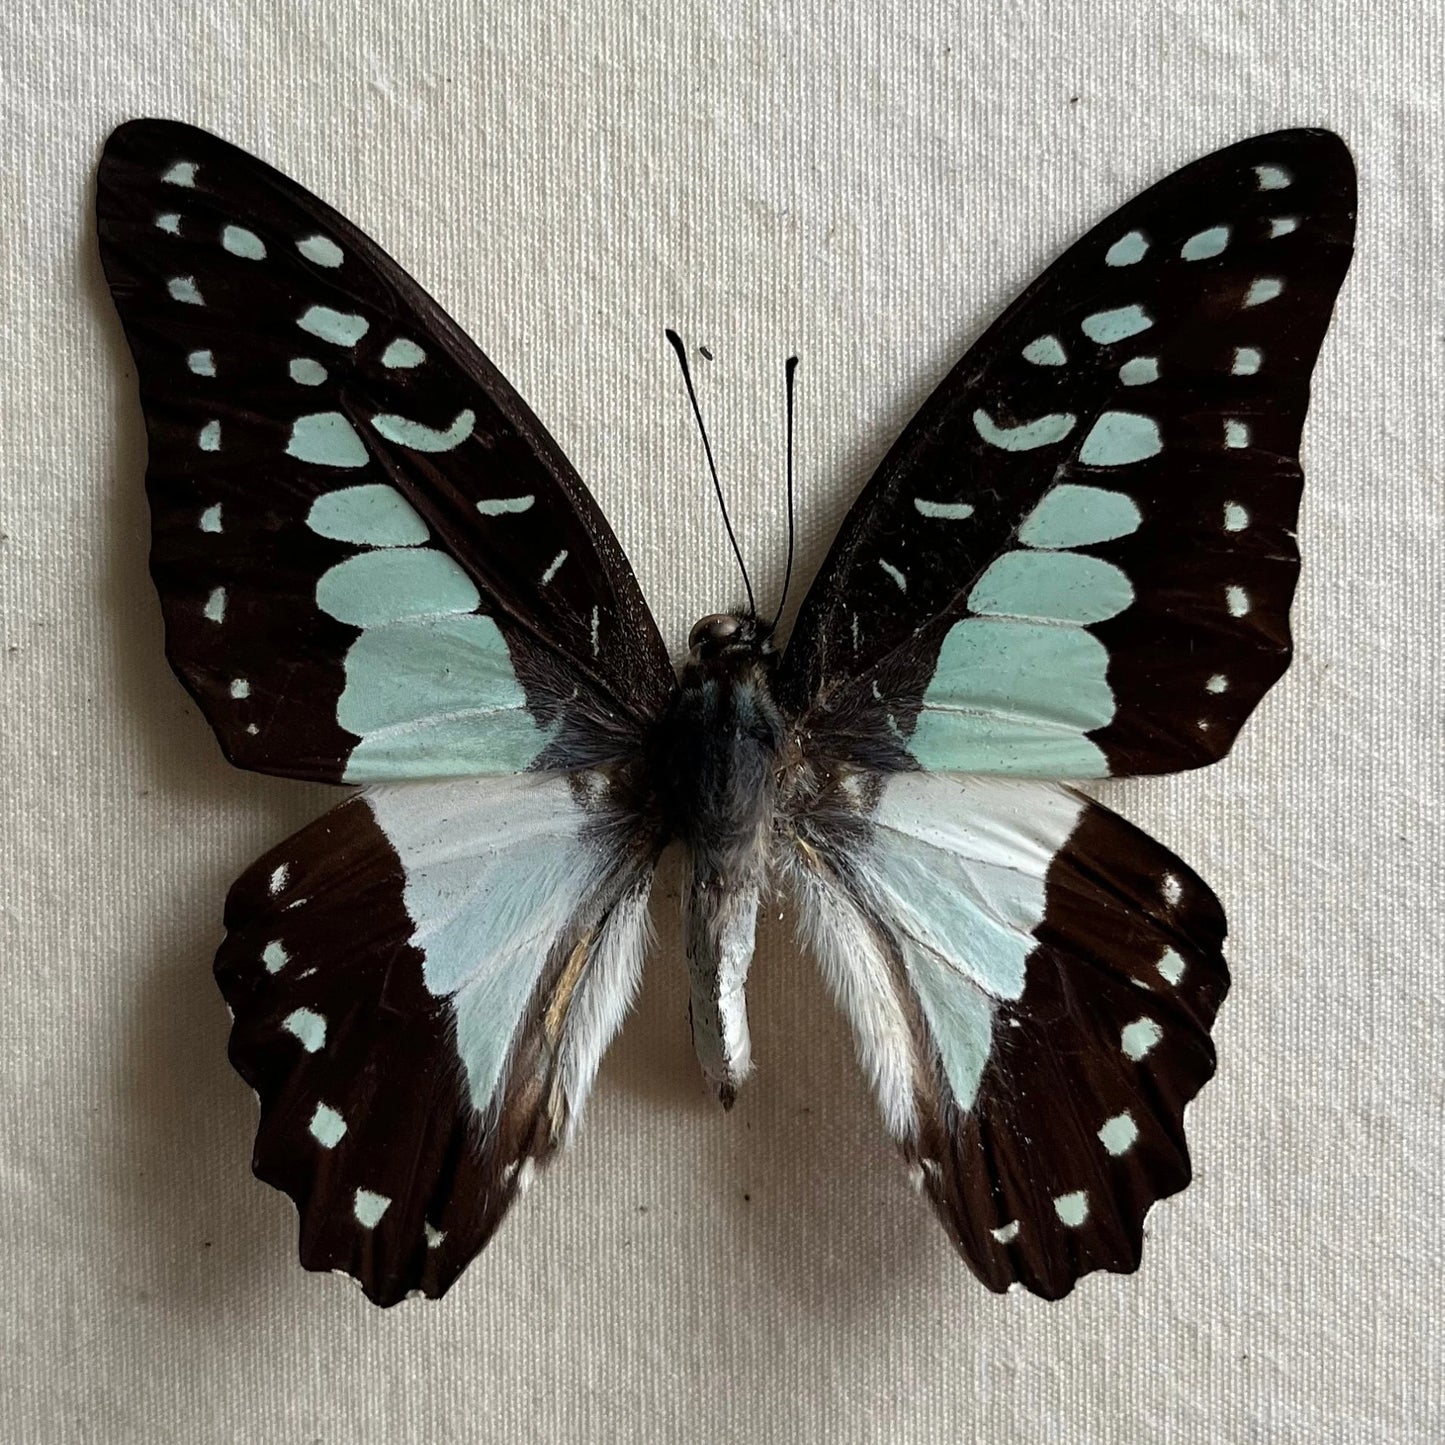 Lot of 5 Great Jay Butterfly 'Graphium eurypylus' unspread